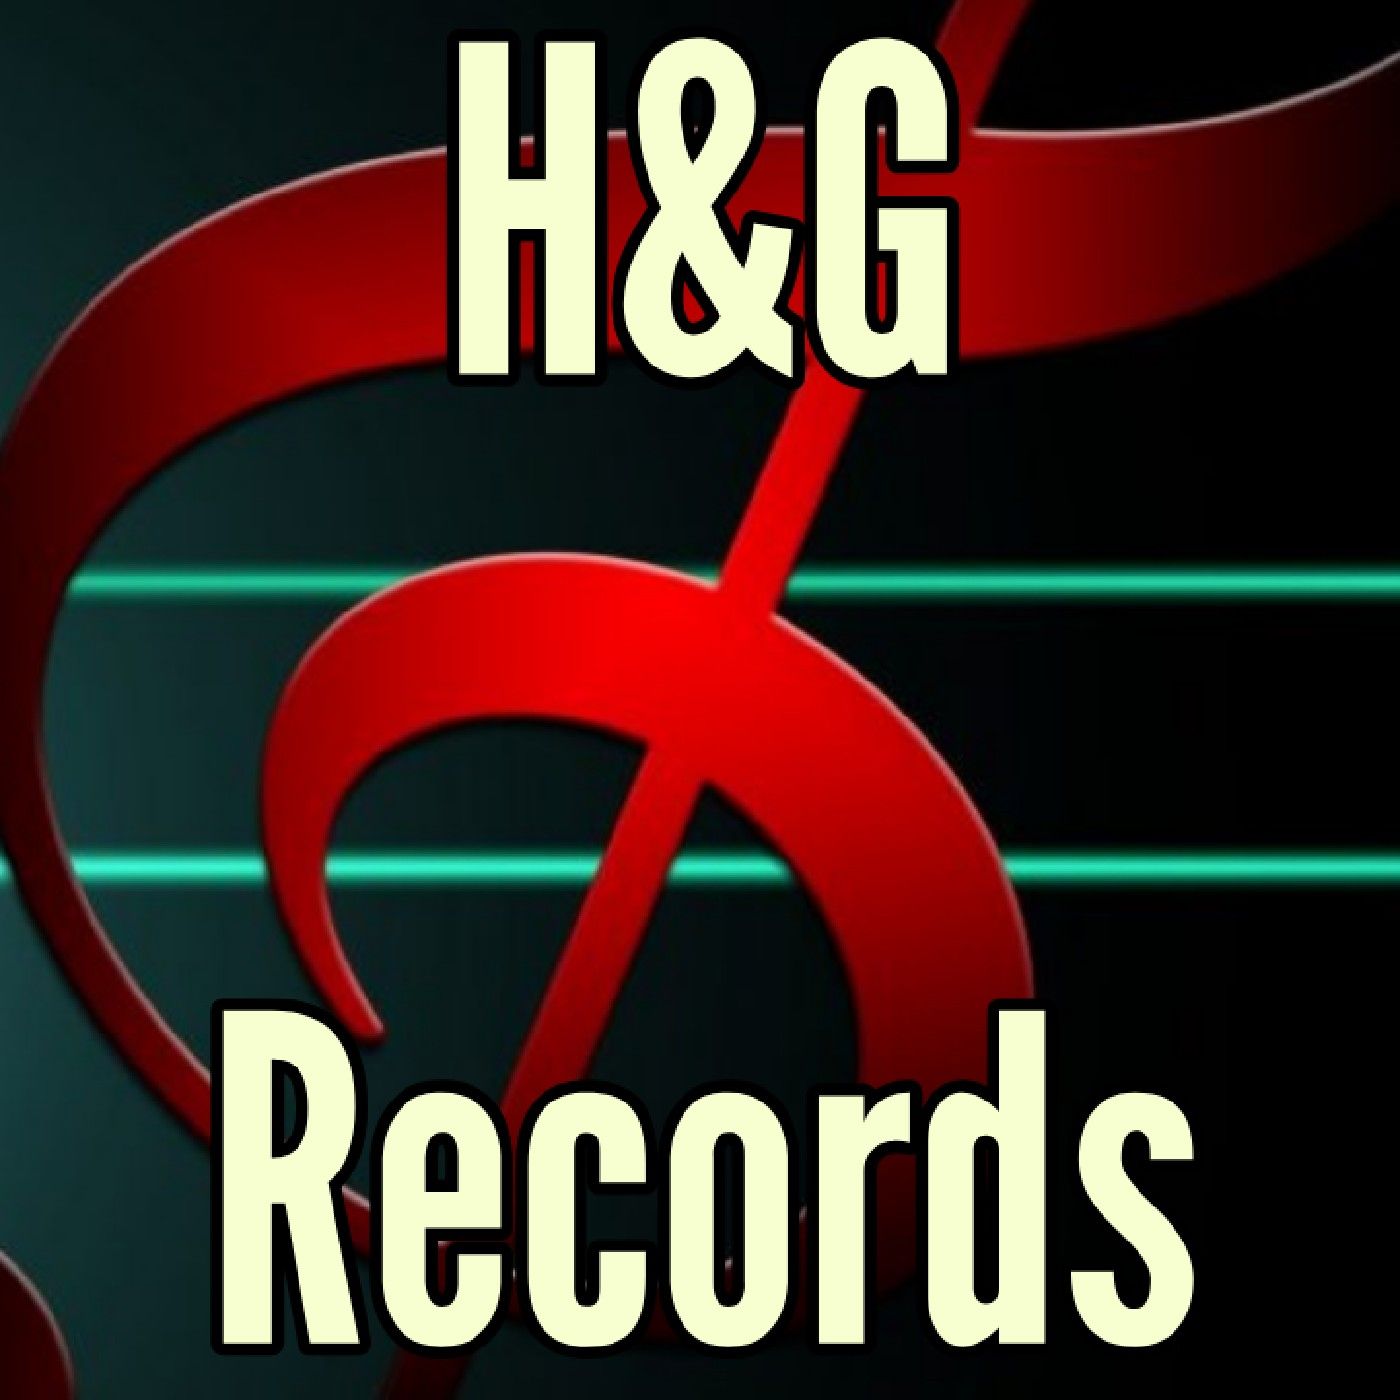 H&G Records